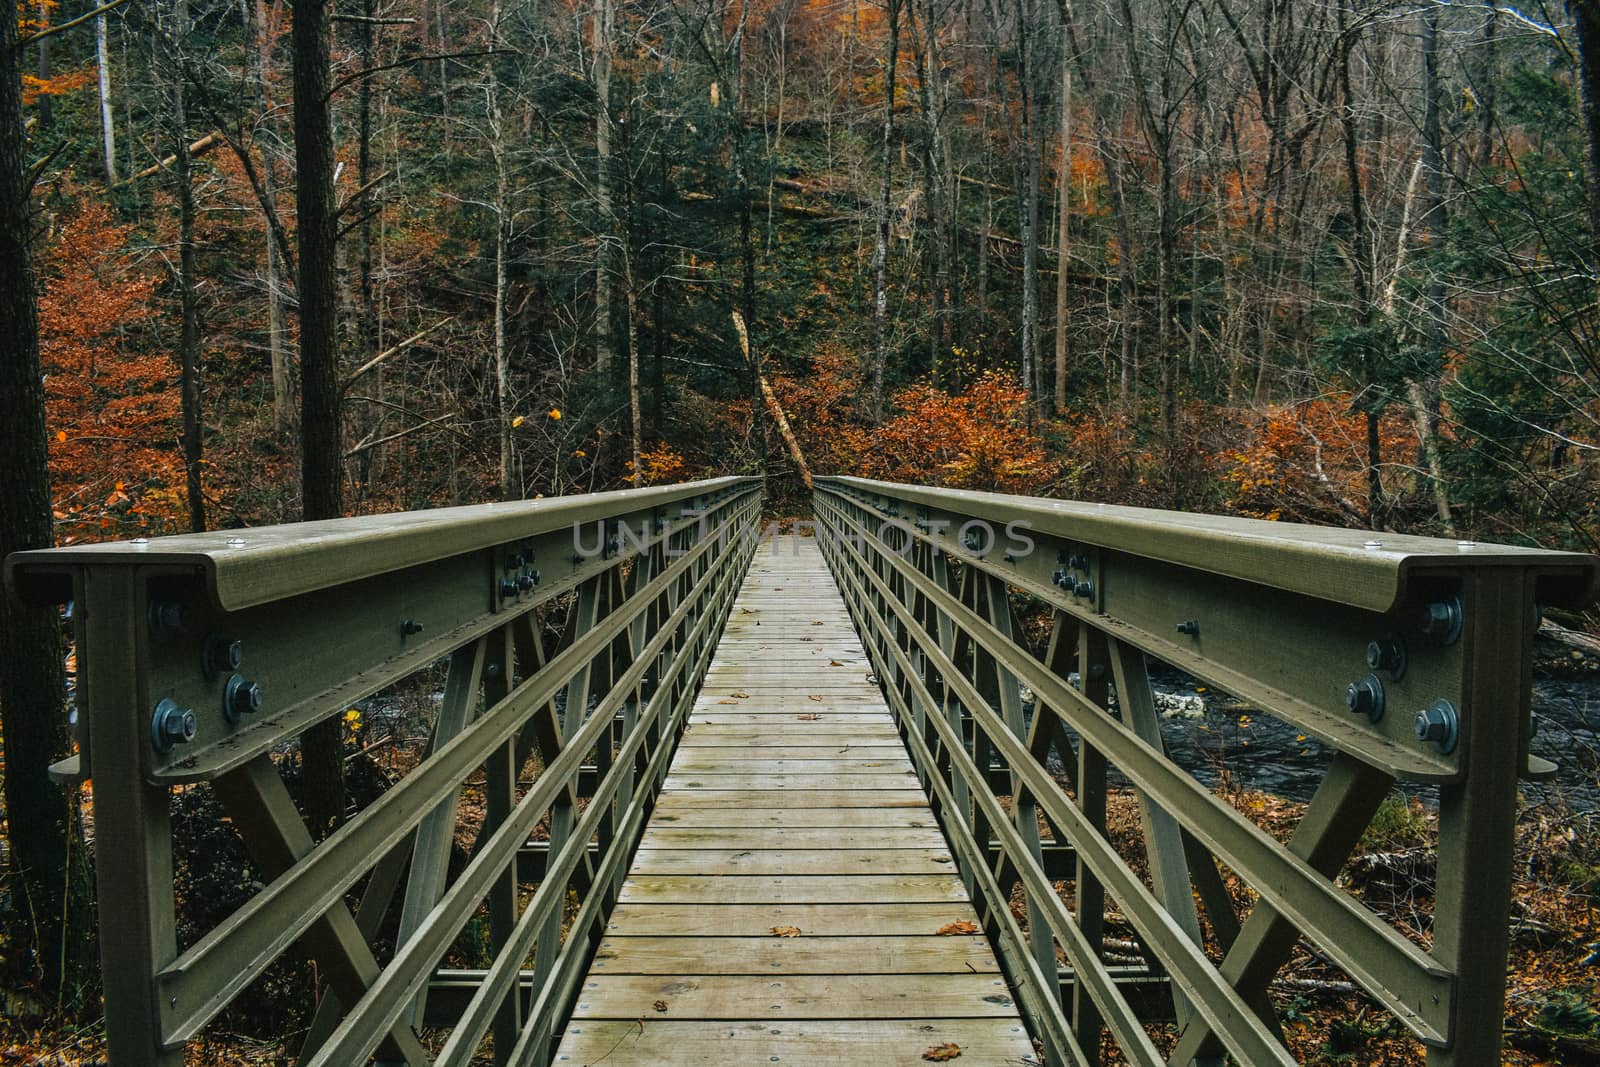 A Steel and Wood Bridge in an Autumn Forest by bju12290